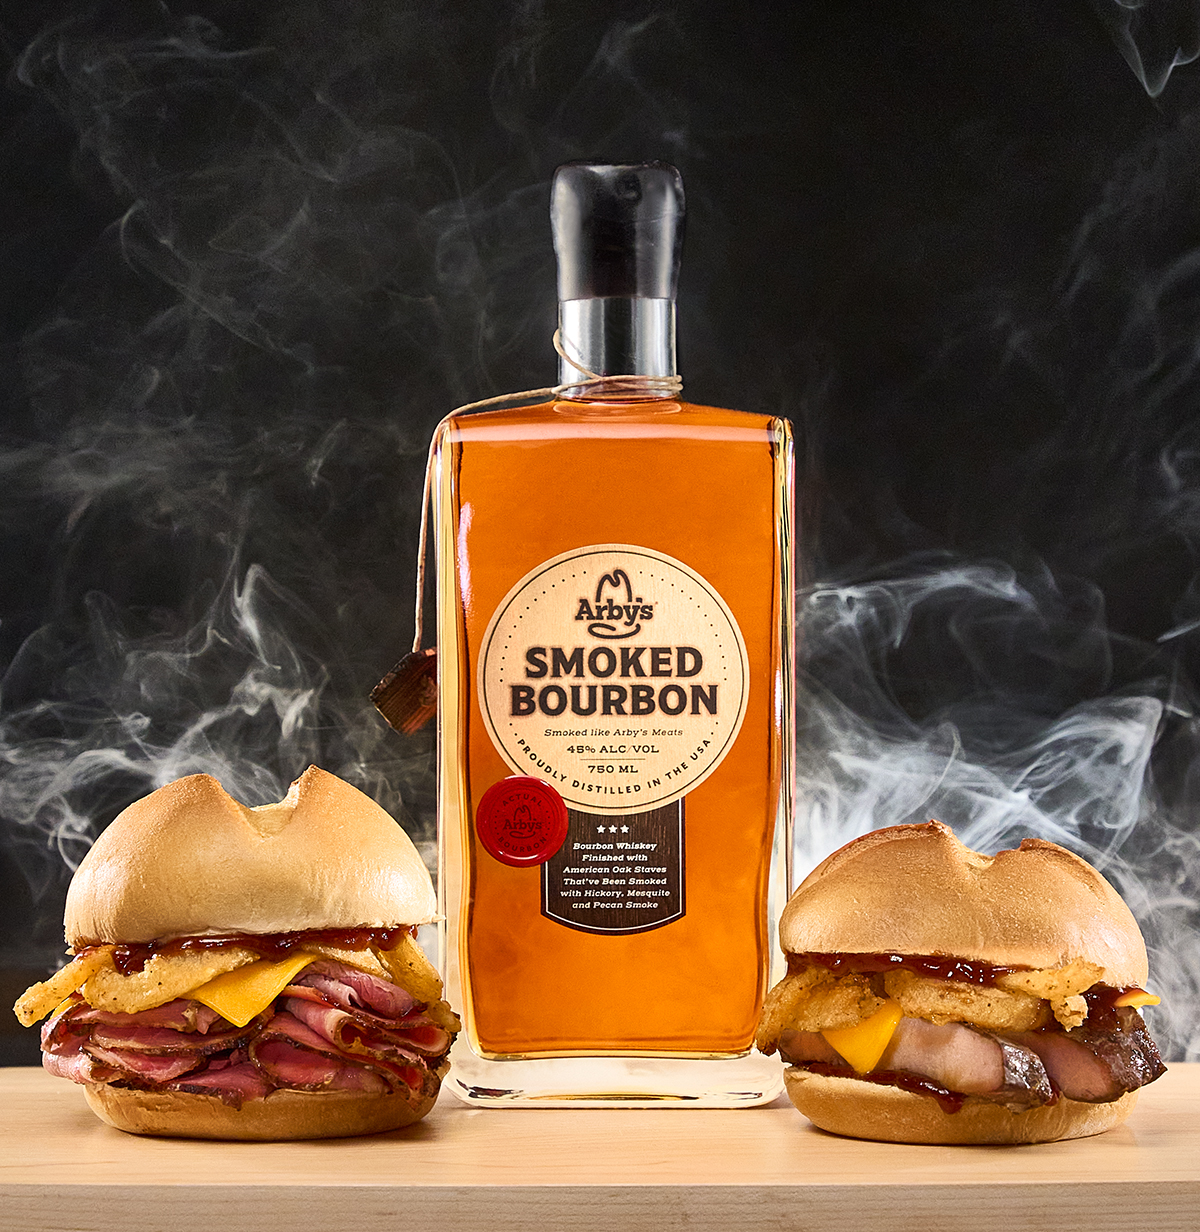 The second drop of Arby's Smoked Bourbon hits today at 12pm ET!